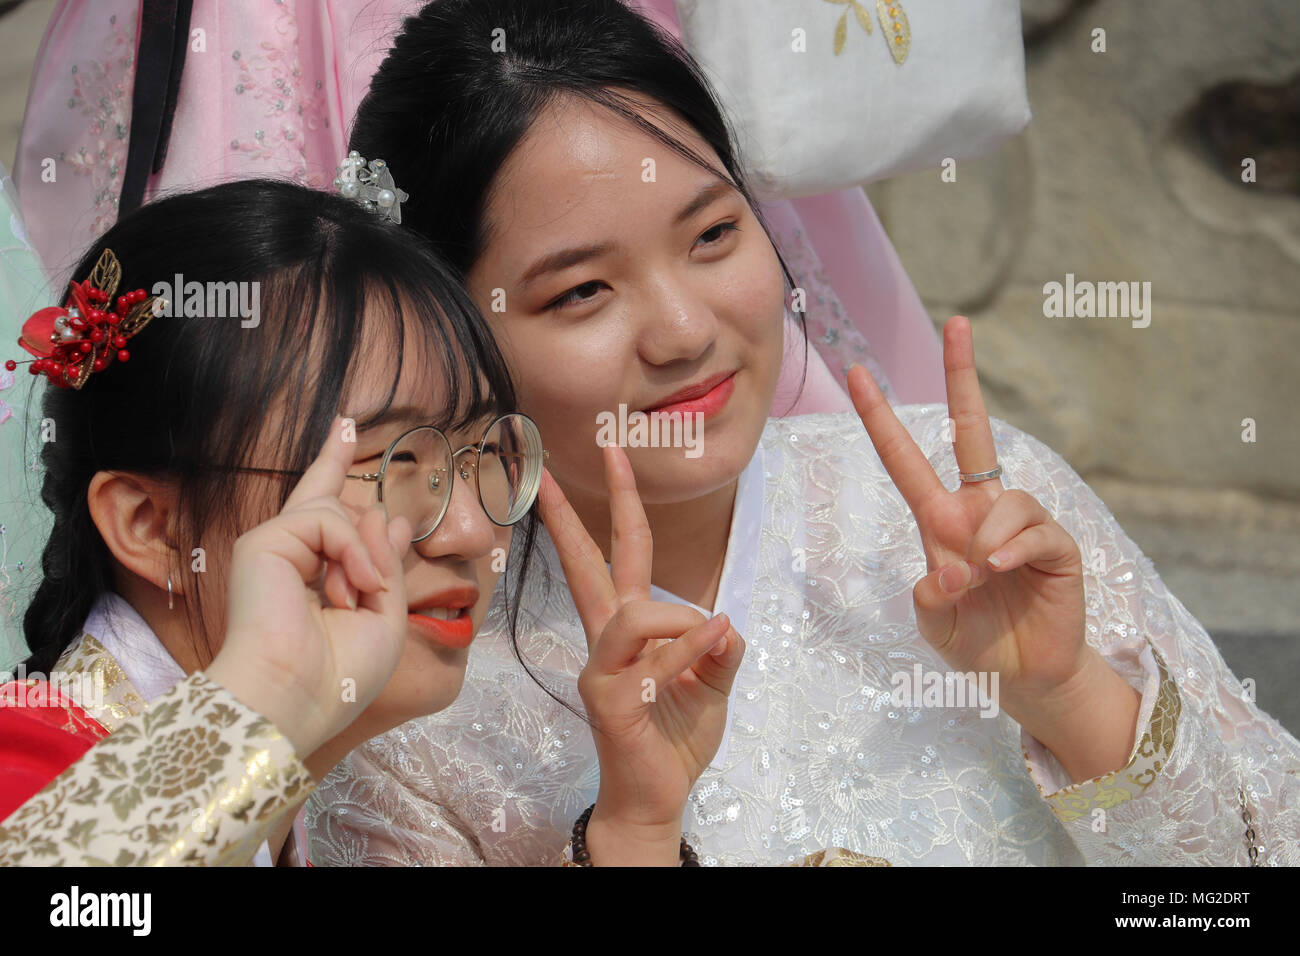 Korean teen girls flash a 'V'(Victory) sign, as they pose for photos, dressed in traditional hanbok fashion in Seoul, South Korea, on a school outing. Stock Photo